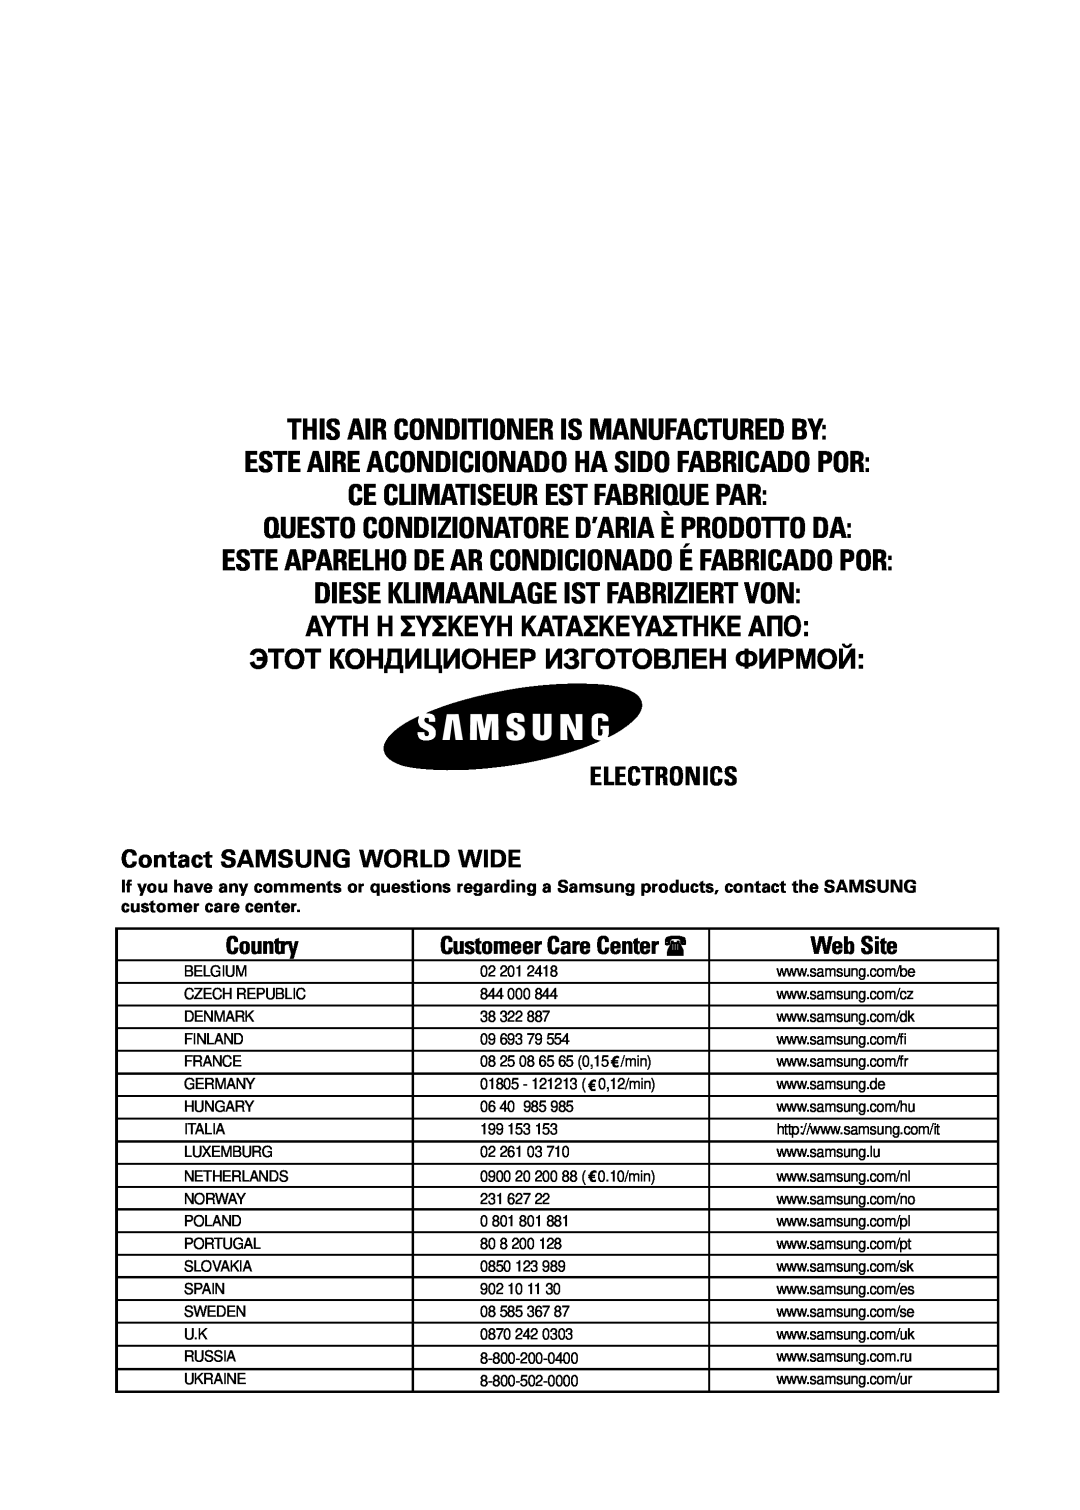 Samsung AVMKH035EA Contact SAMSUNG WORLD WIDE, Country, Web Site, This Air Conditioner Is Manufactured By, Electronics 